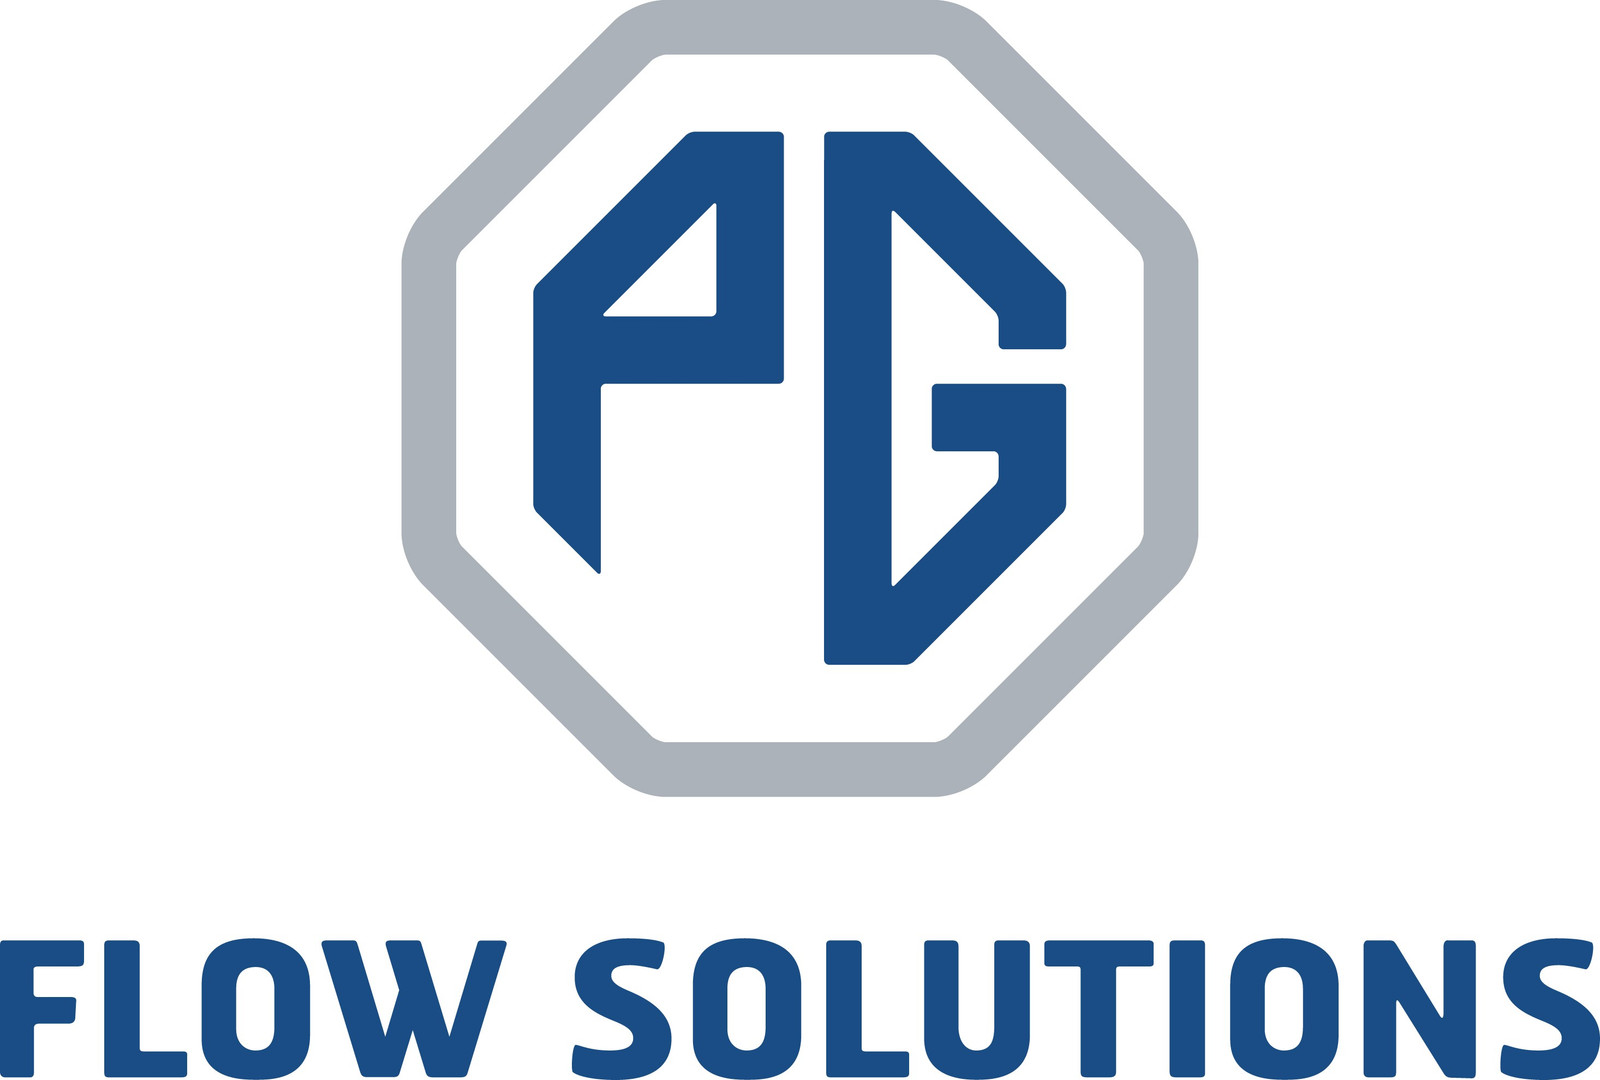 PG FLOW SOLUTIONS AS